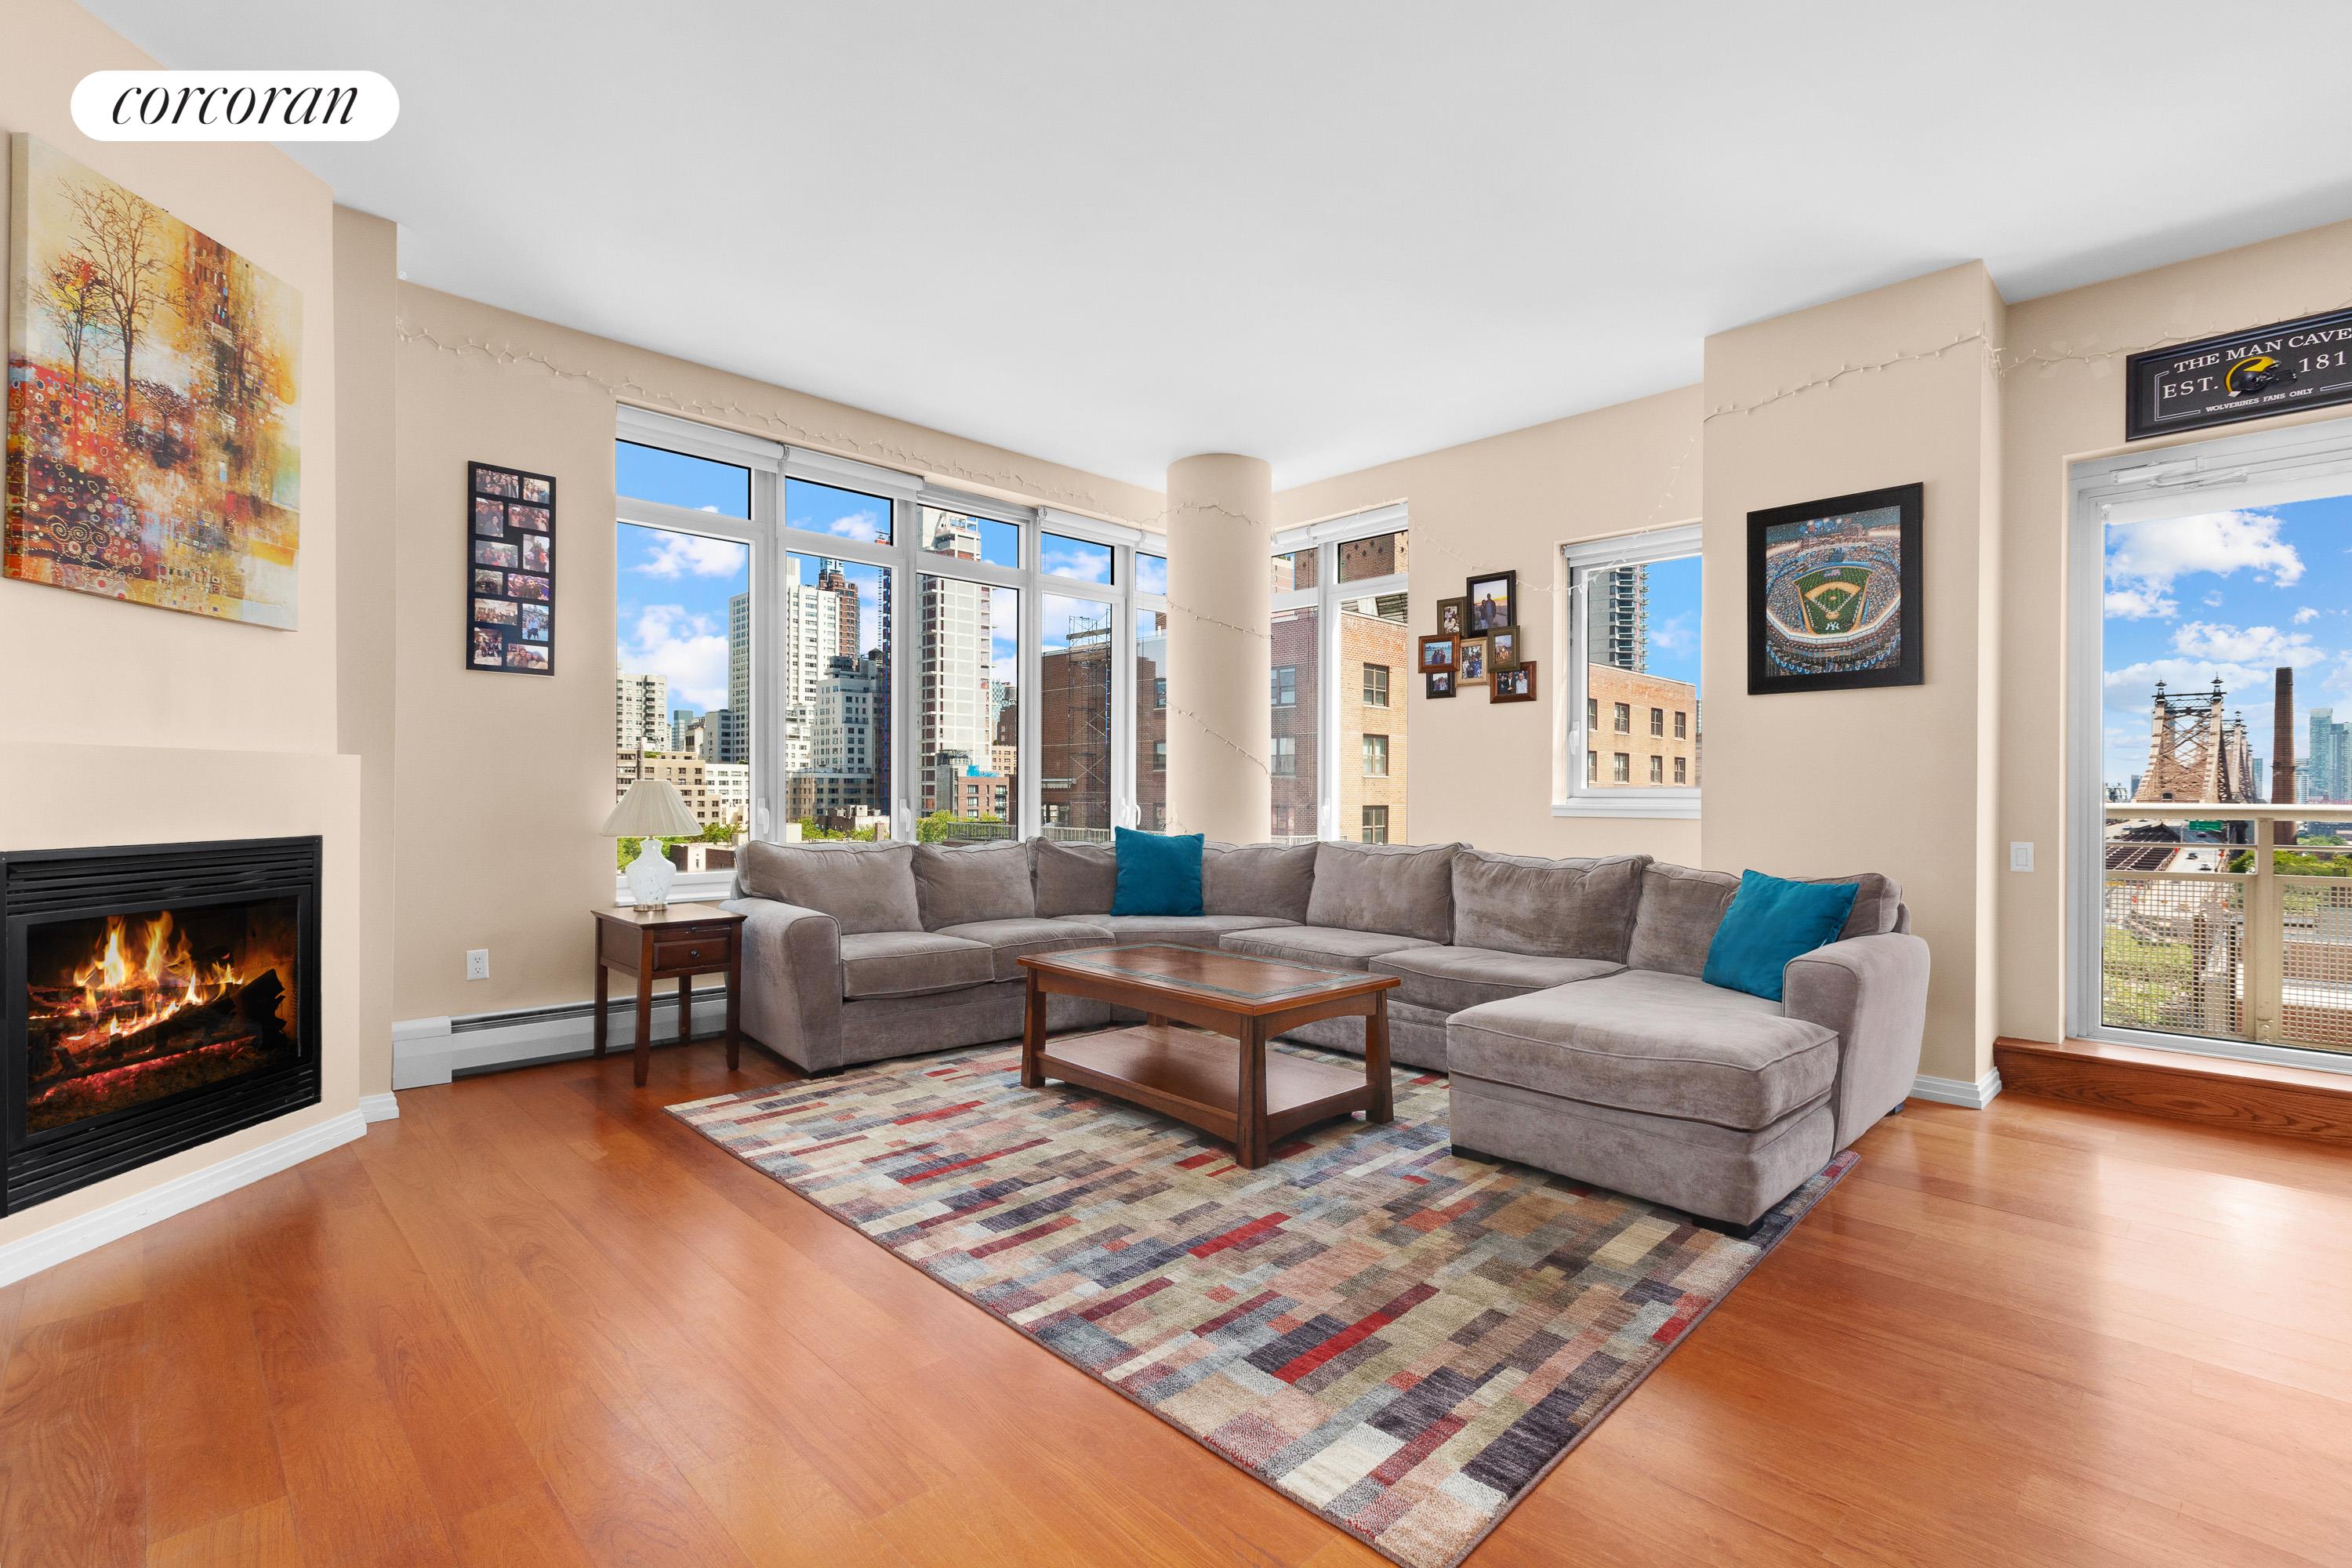 205 East 59th Street 10A, Lenox Hill, Upper East Side, NYC - 1 Bedrooms  
1.5 Bathrooms  
3 Rooms - 